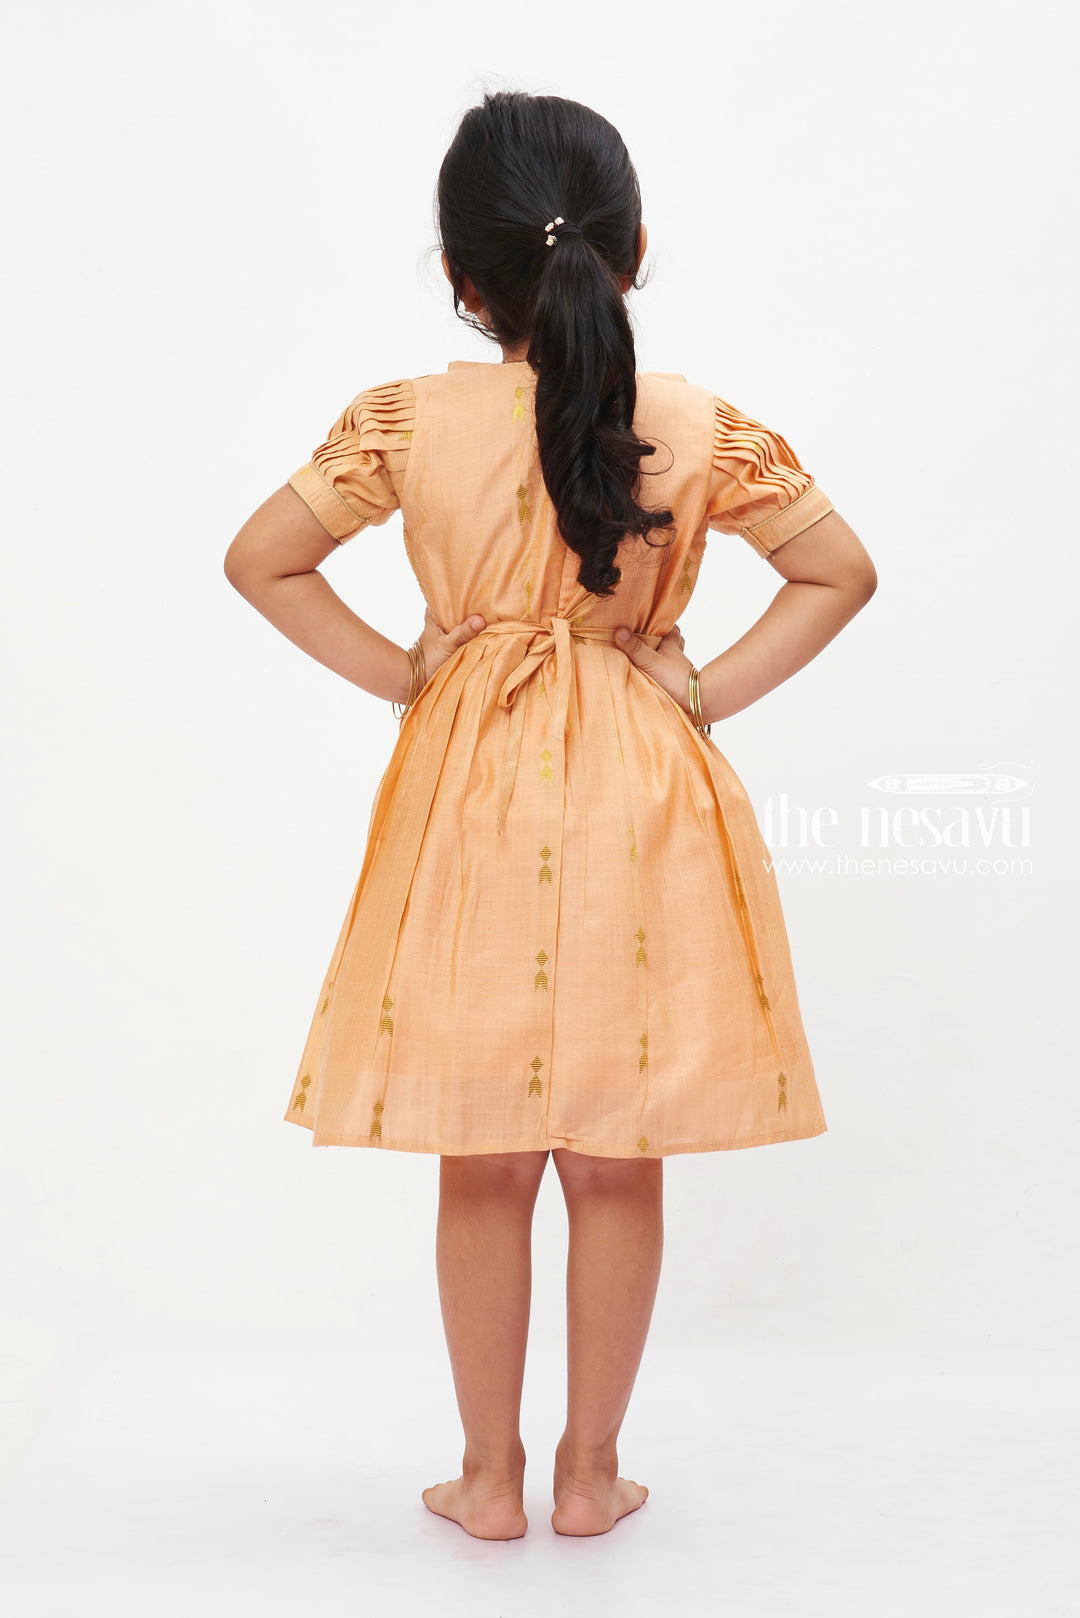 The Nesavu Girls Cotton Frock Autumn Glow Puff Sleeve Dress: Girls' Copper-Toned Frock with Gleaming Accents Nesavu Girls Copper-Toned Harvest Dress with Puff Sleeves | Golden Motif Party Wear | The Nesavu